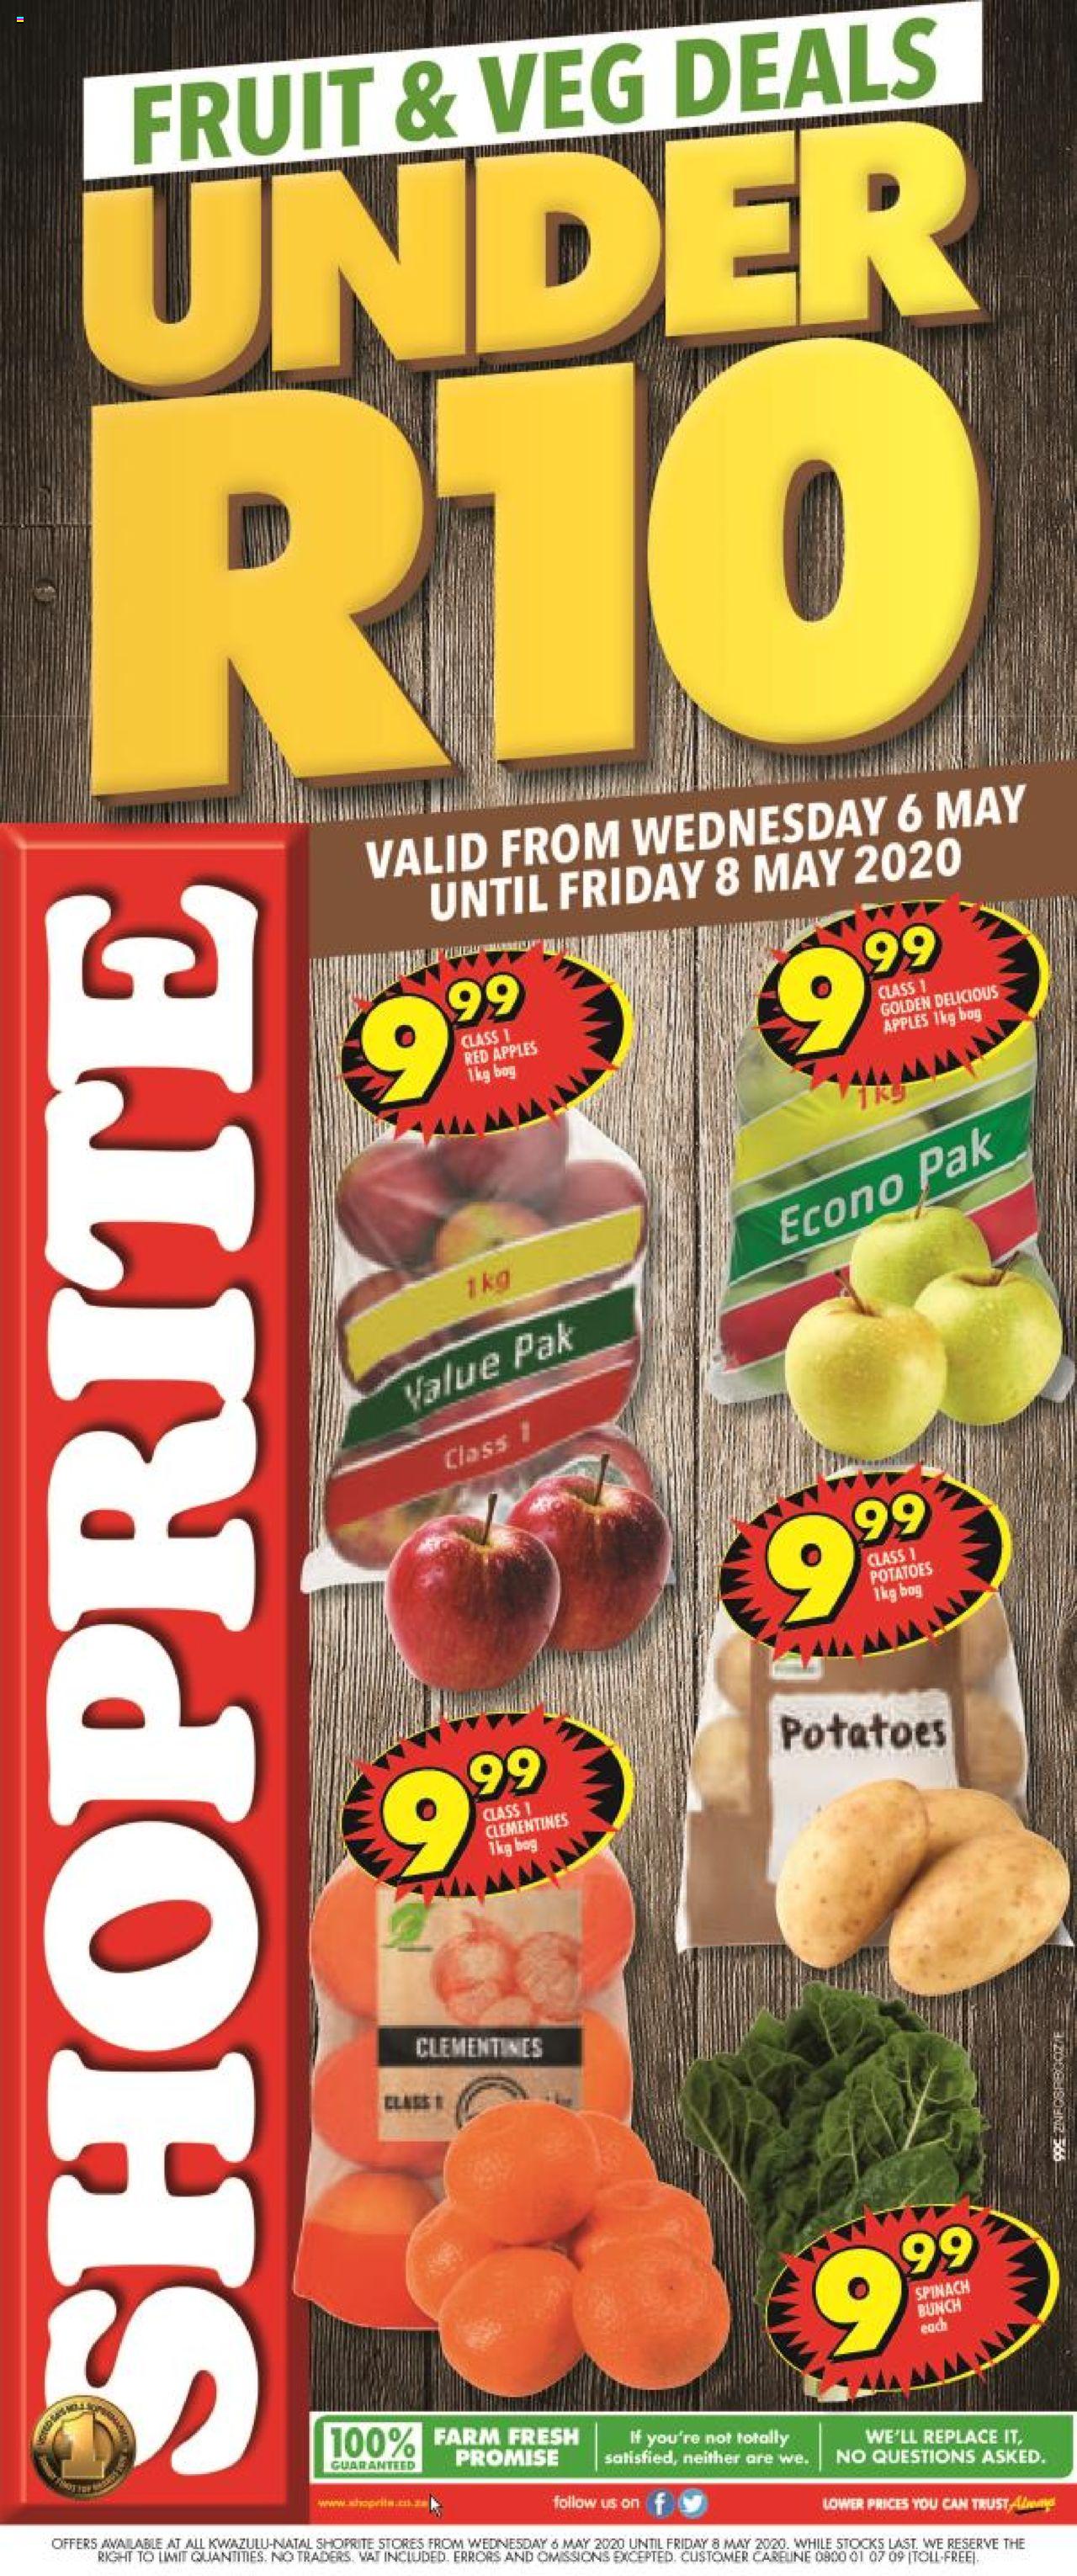 Shoprite Specials Fruit and Vegs 6 May 2020